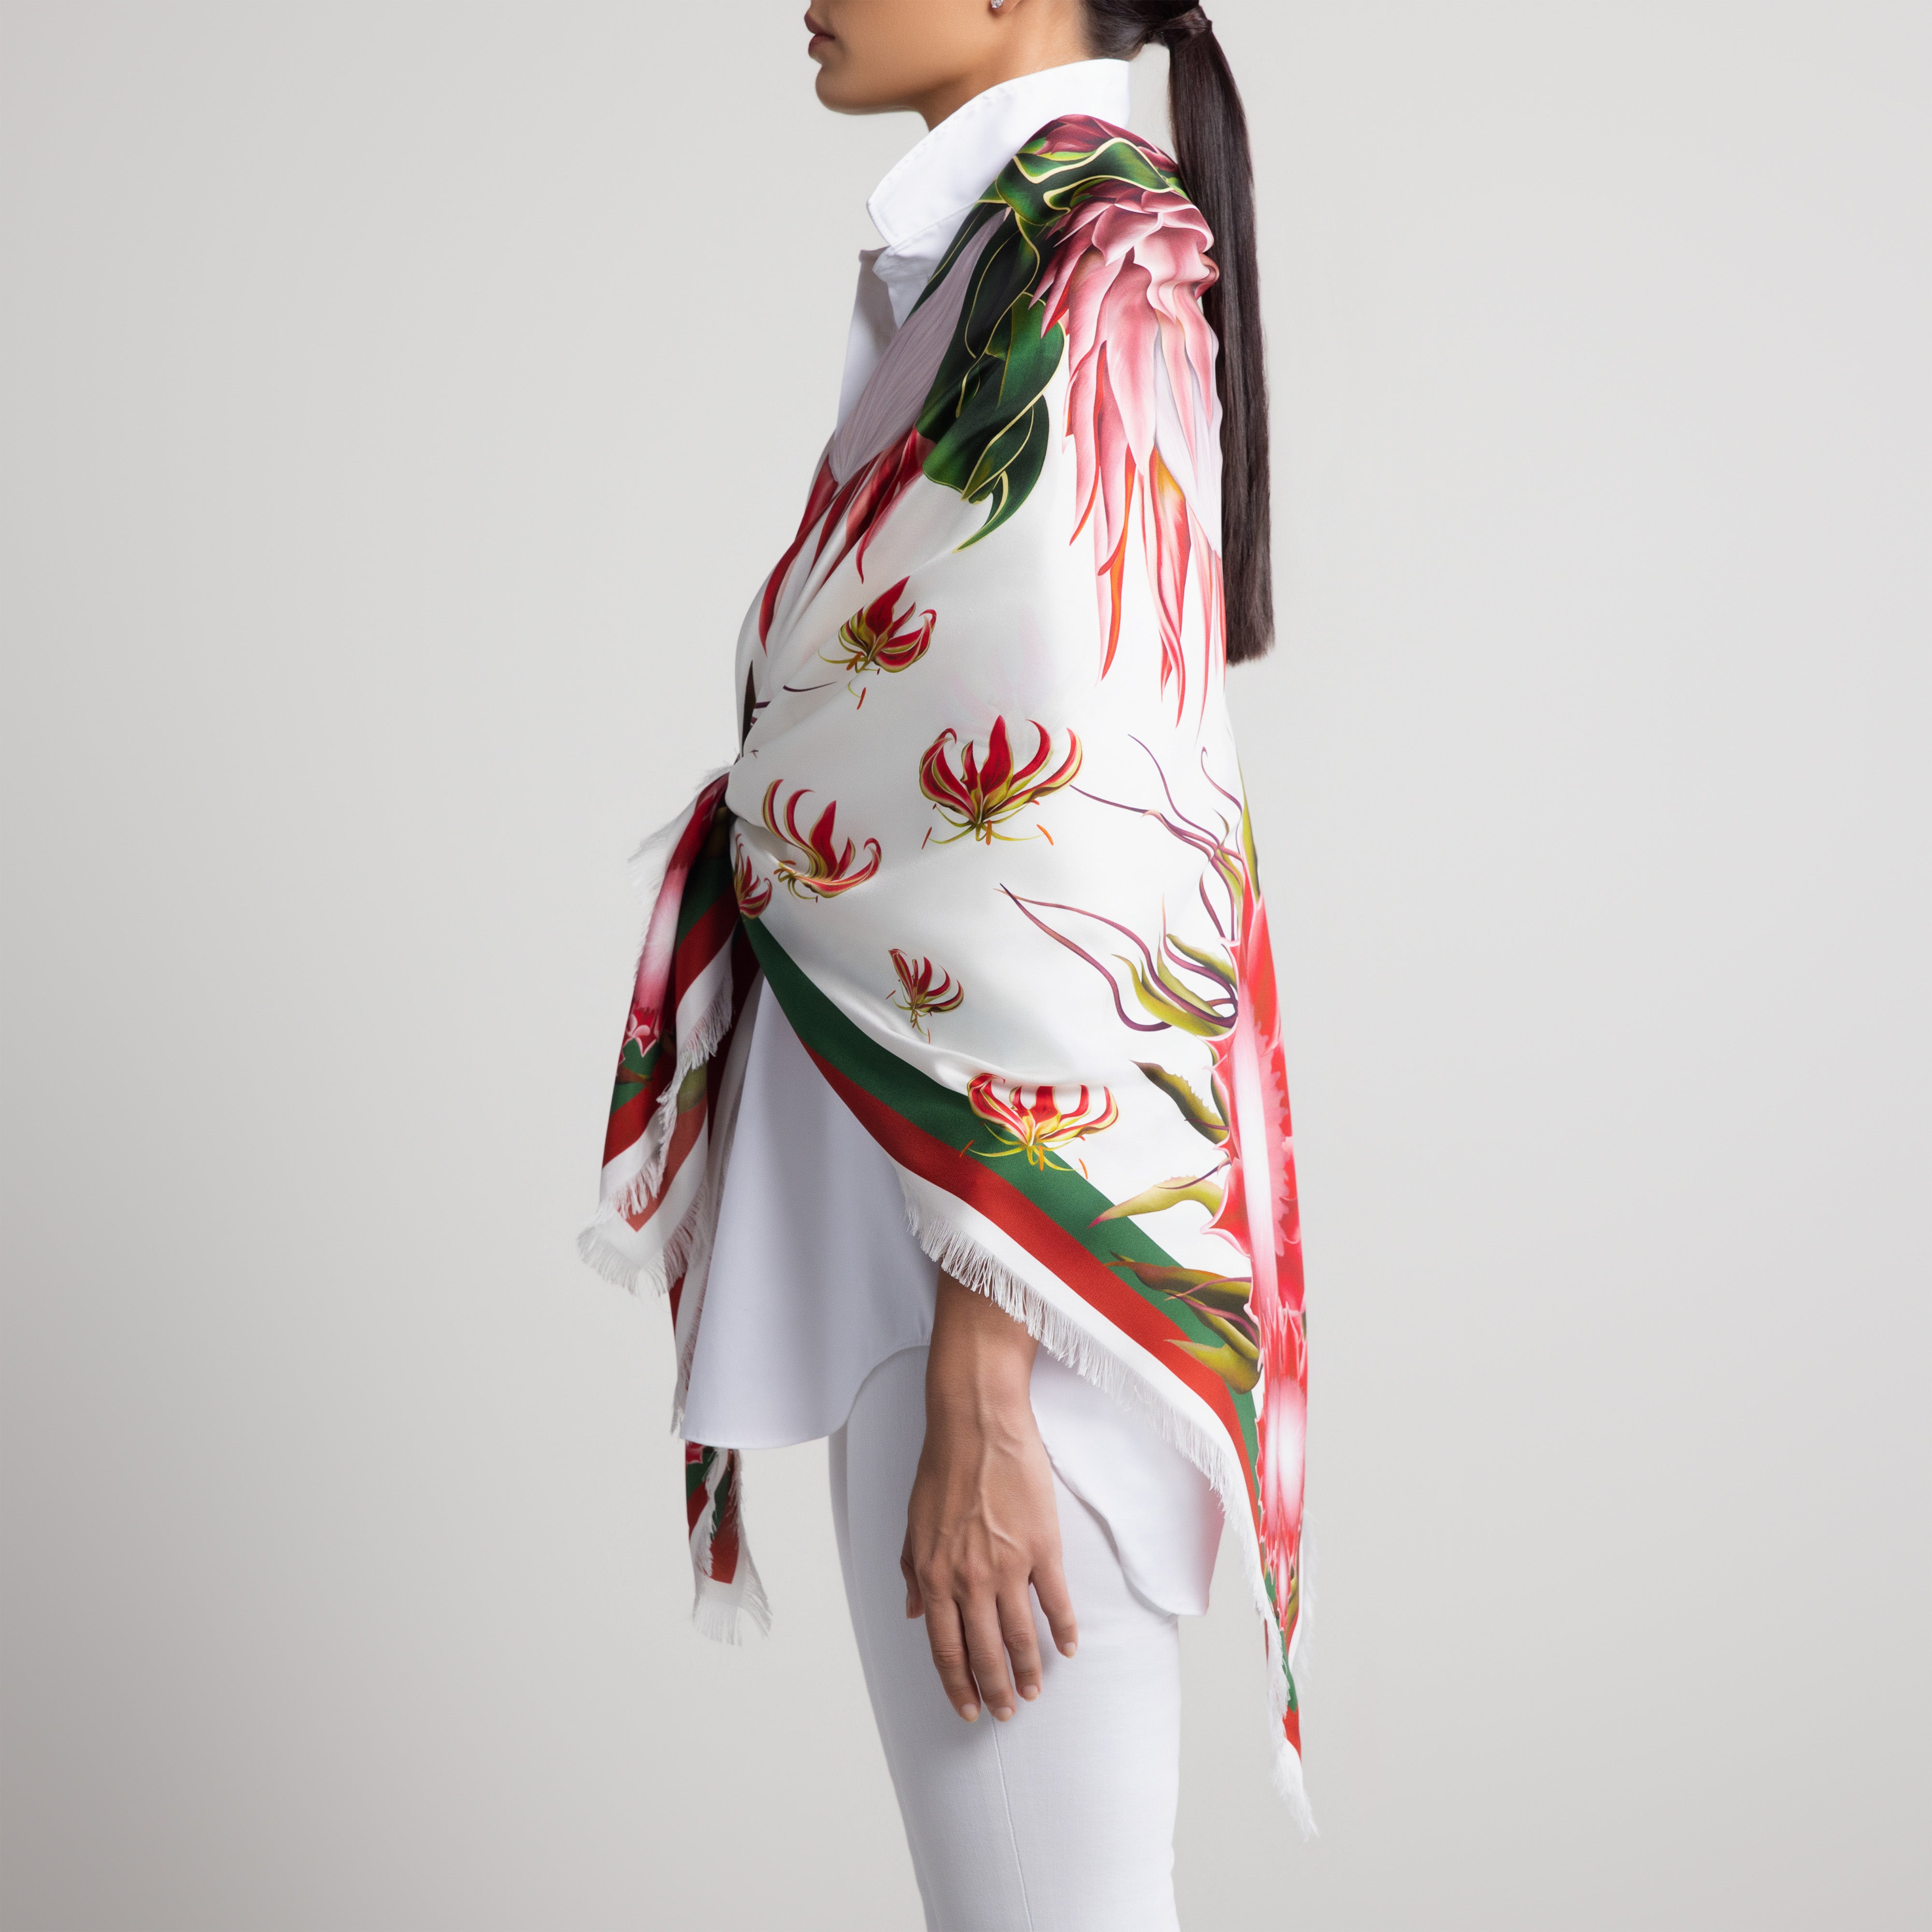 Protea Grande Silk Scarf in White with Hand-Feathered Edges